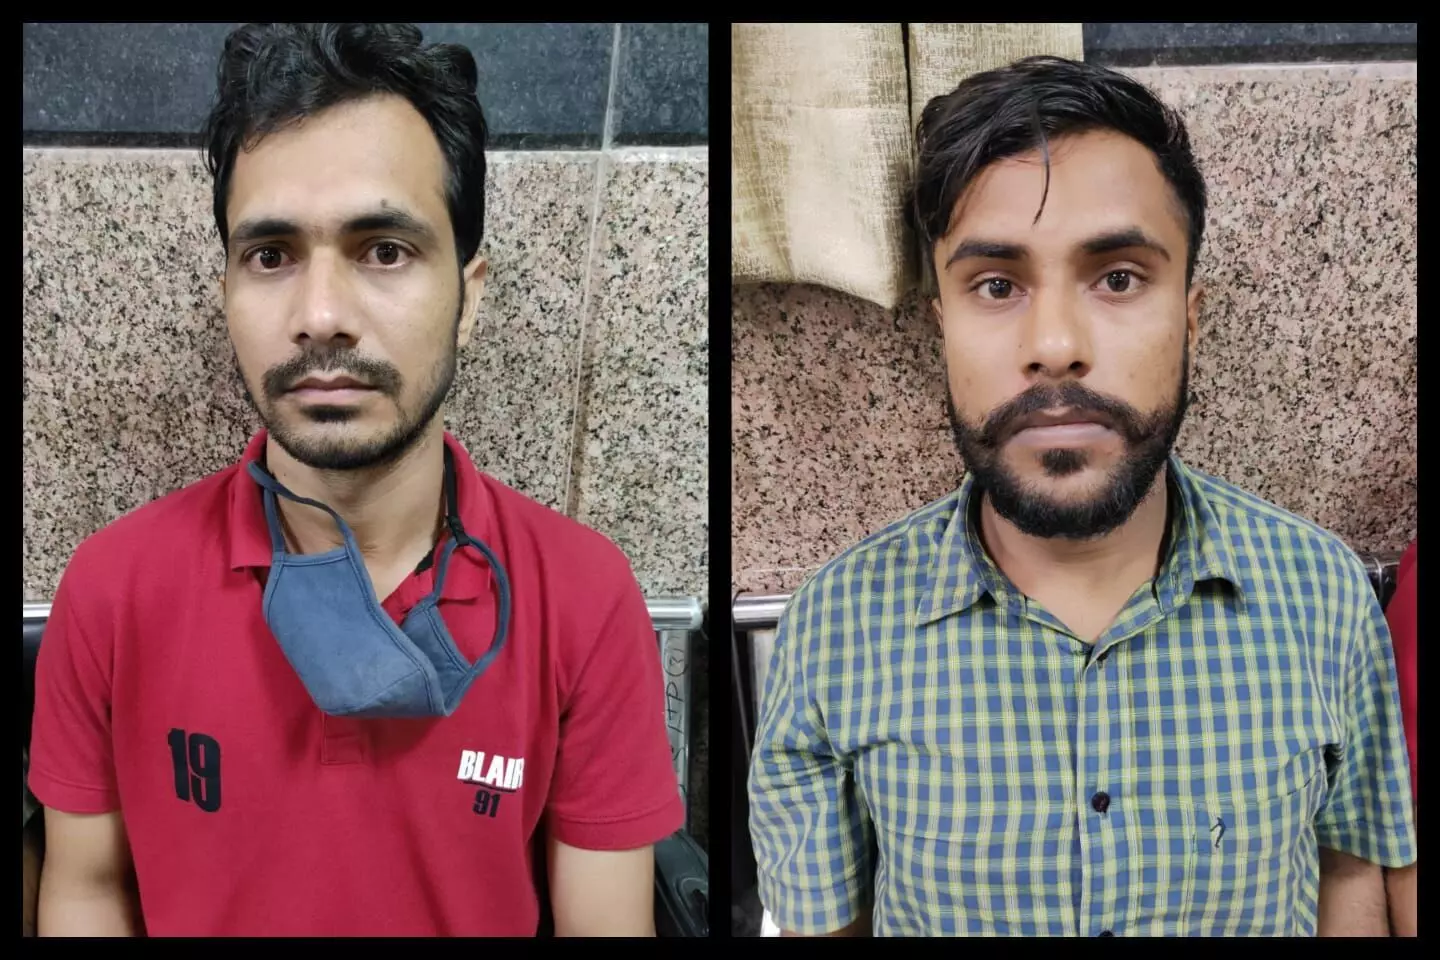 Cyber crime cops arrest two for impersonating bankers, looting people